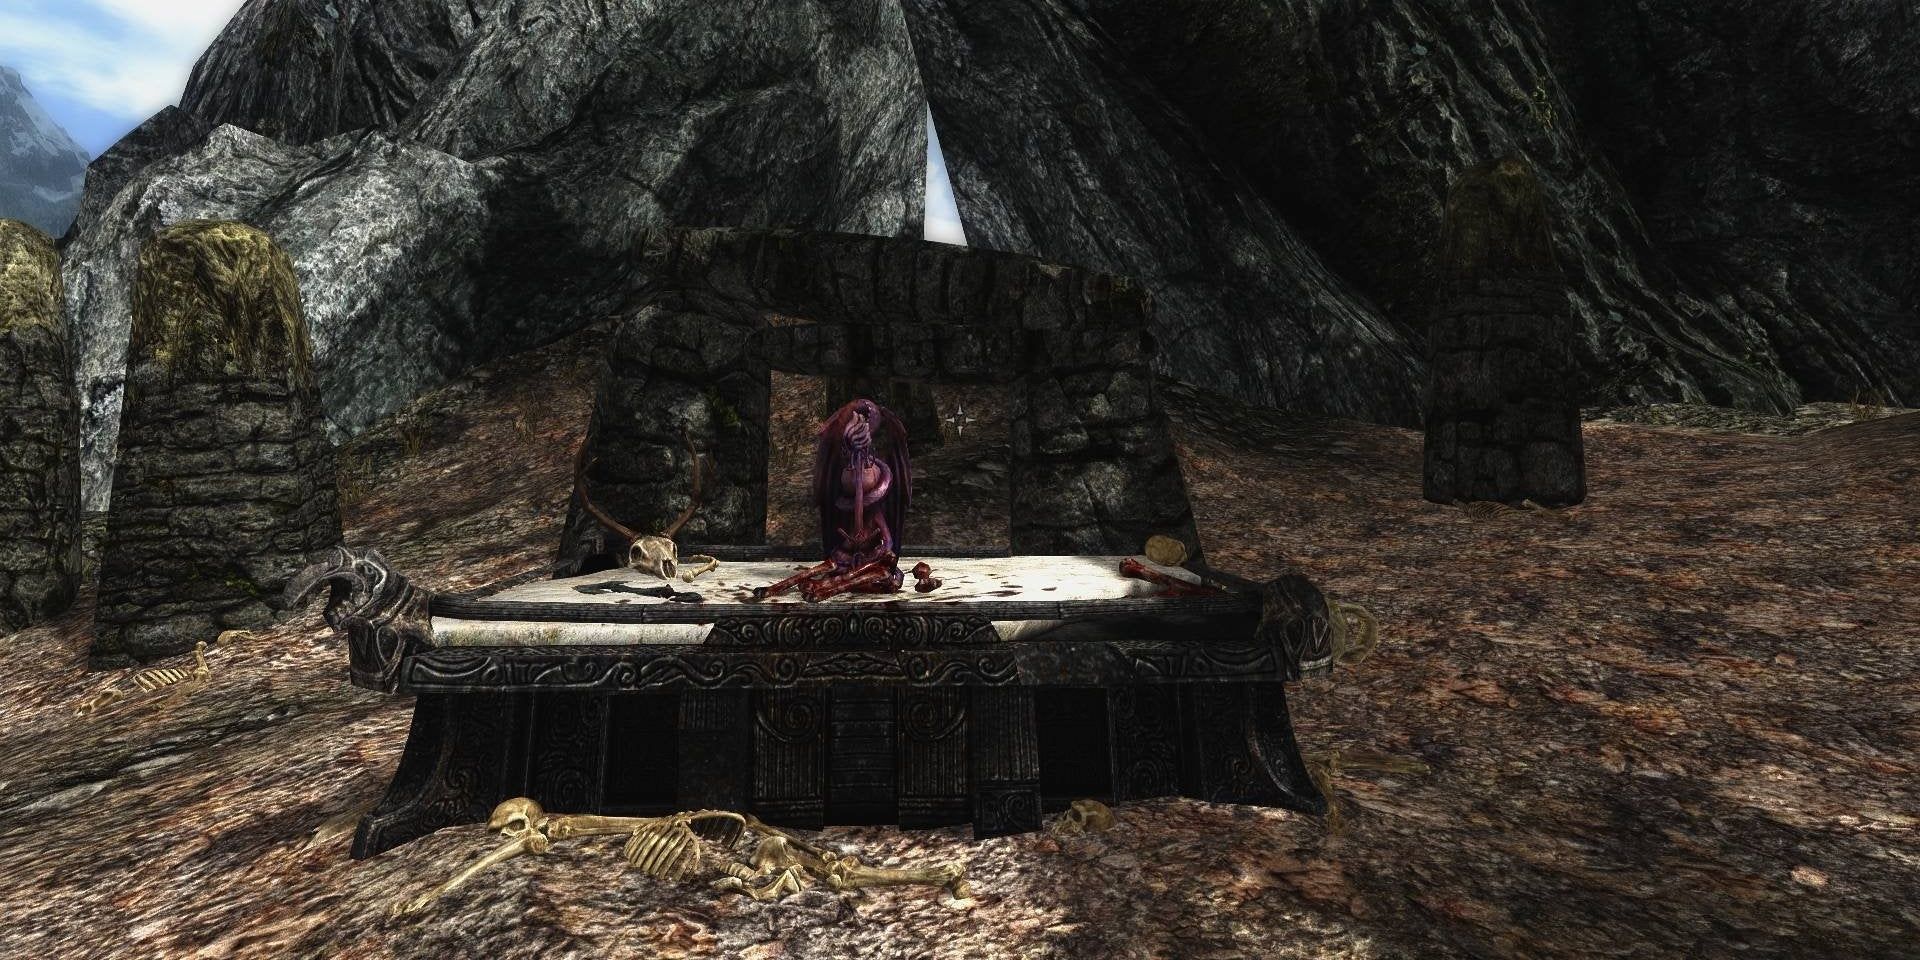 https://www.reddit.com/r/skyrim/comments/bd86gp/just_found_an_unmarked_shrine_to_akatosh_in_the/